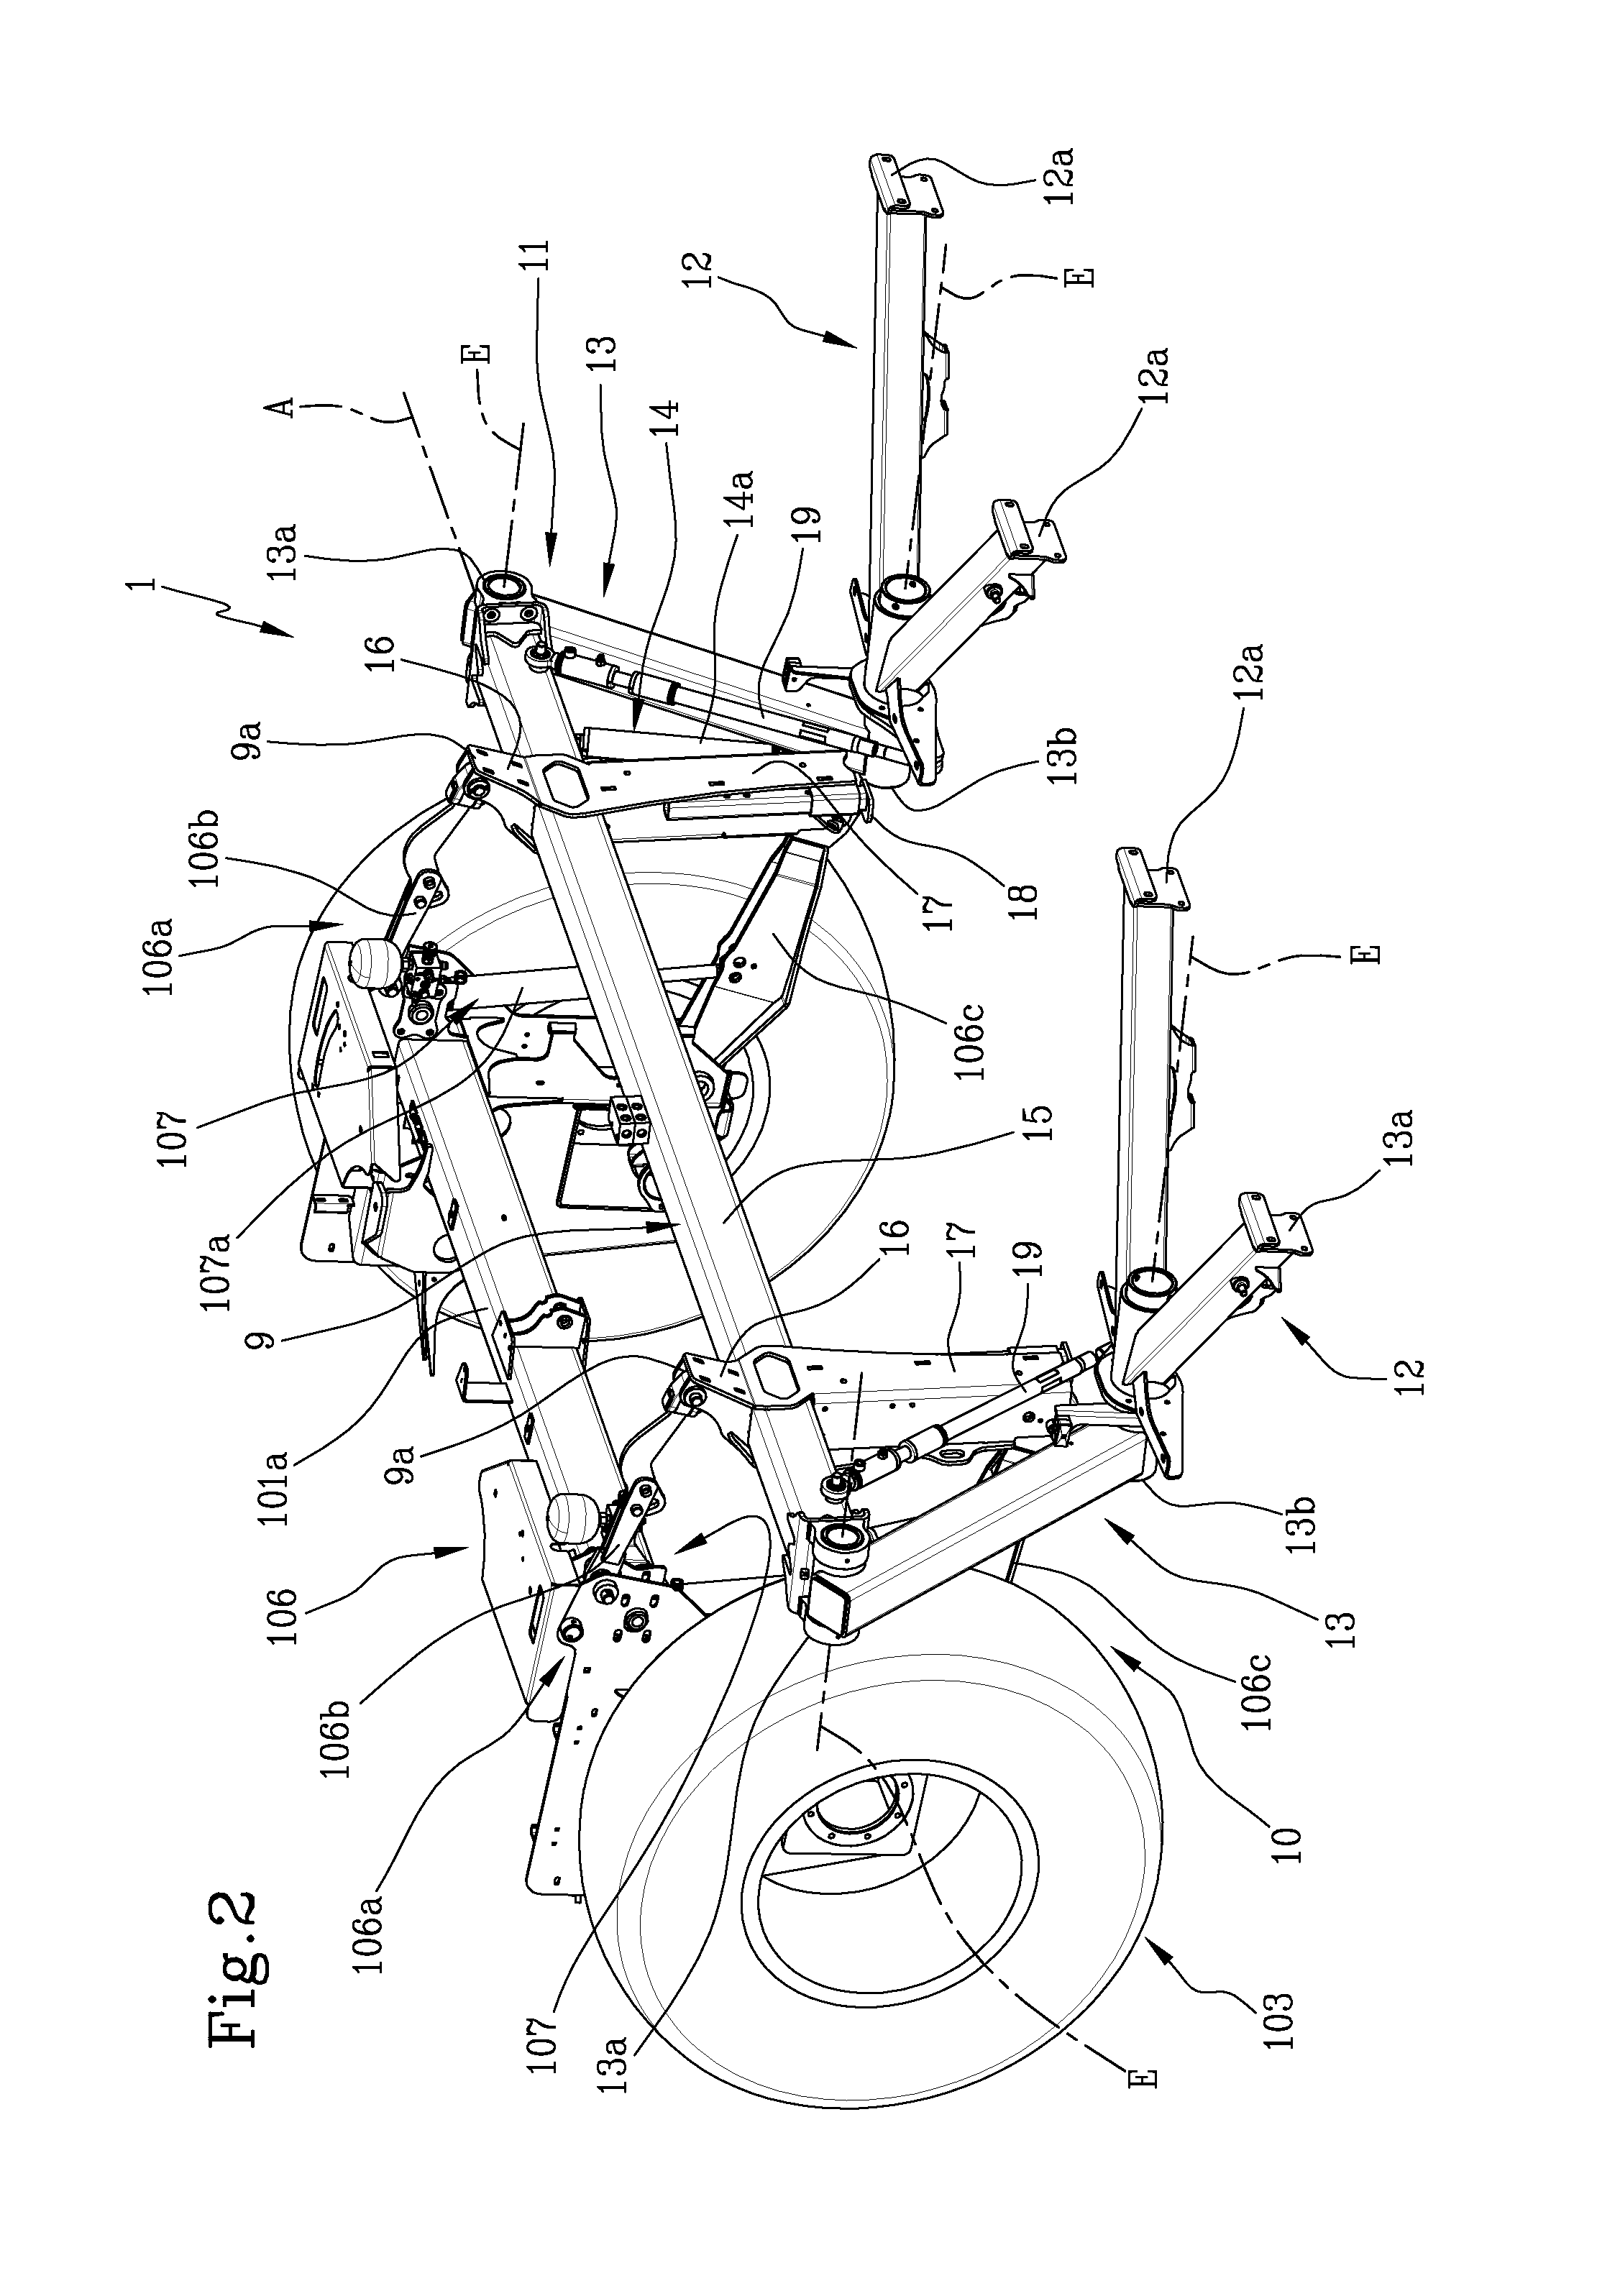 Device for harvesting long agricultural products and agricultural self-propelled  unit for harvesting agricultural products comprising the device